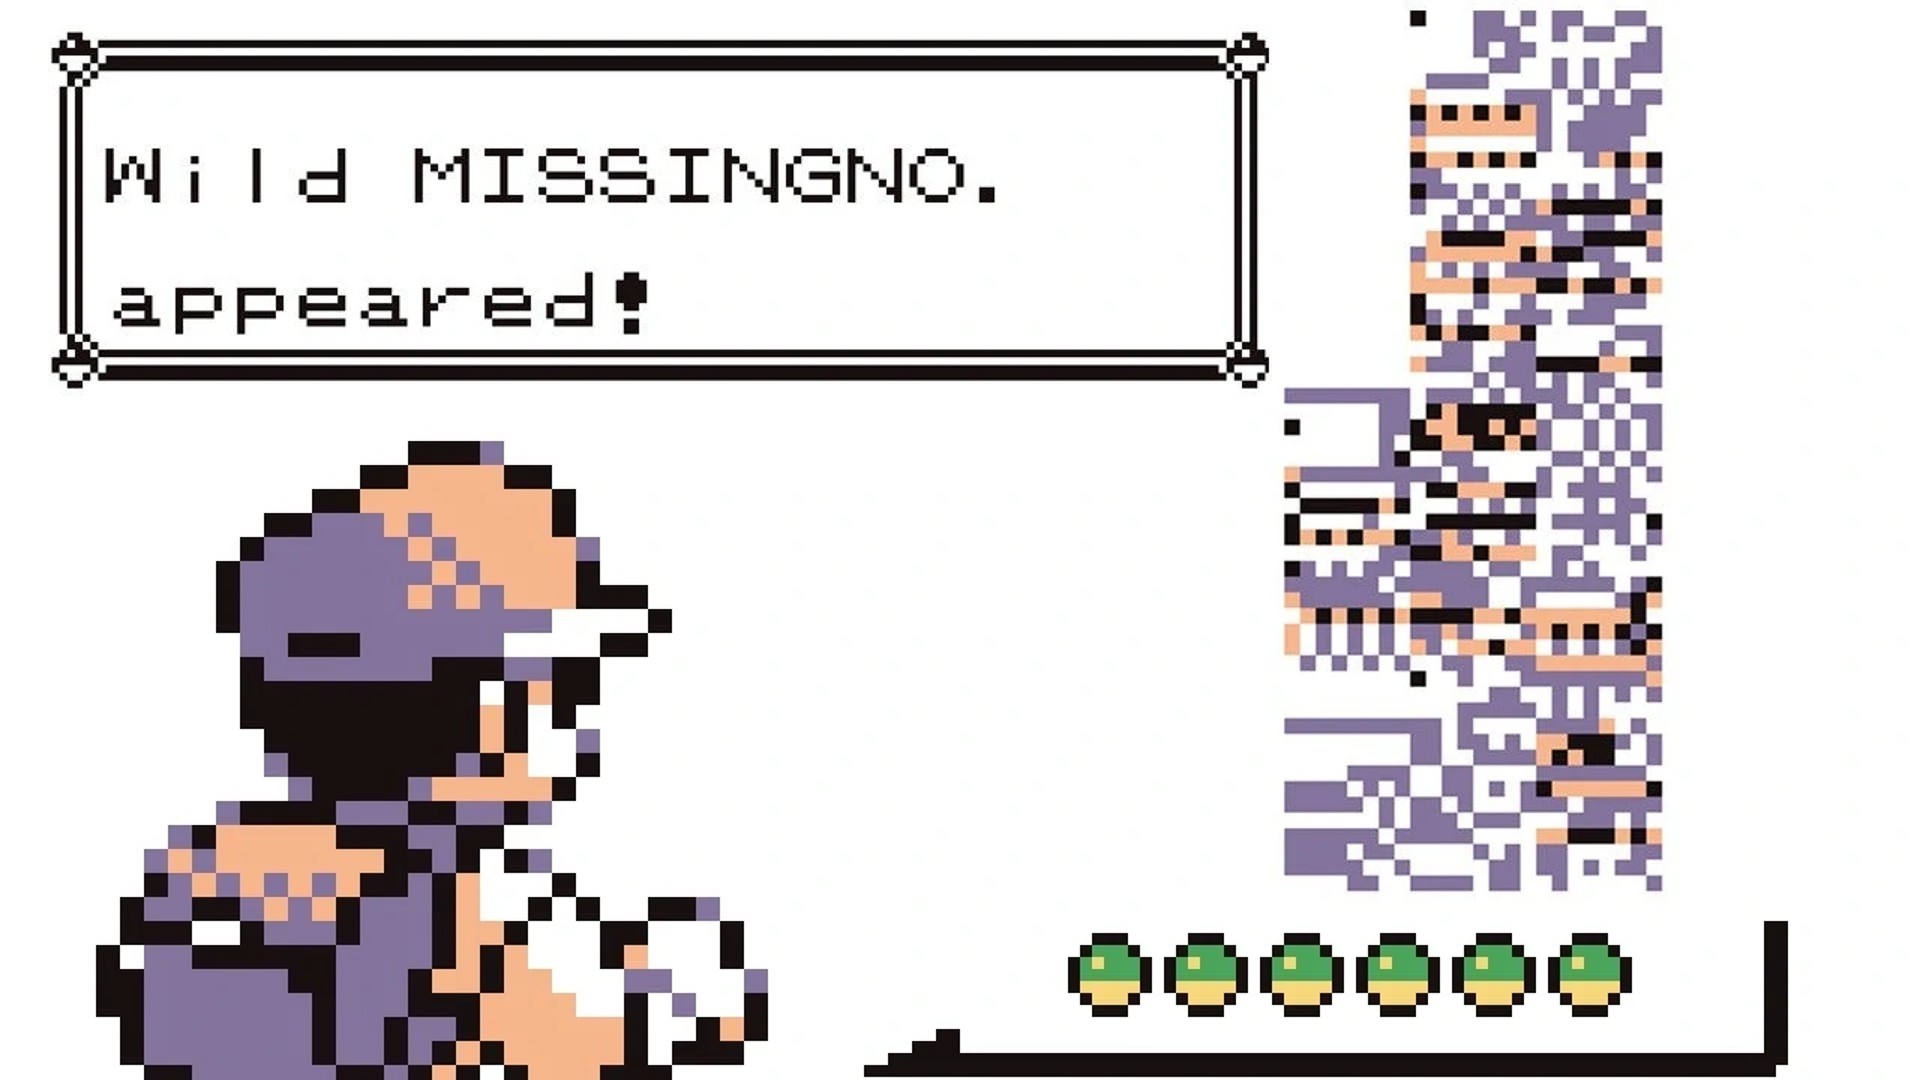 MissingNo is an unofficial Pokemon glitch in Pokemon Red and Blue